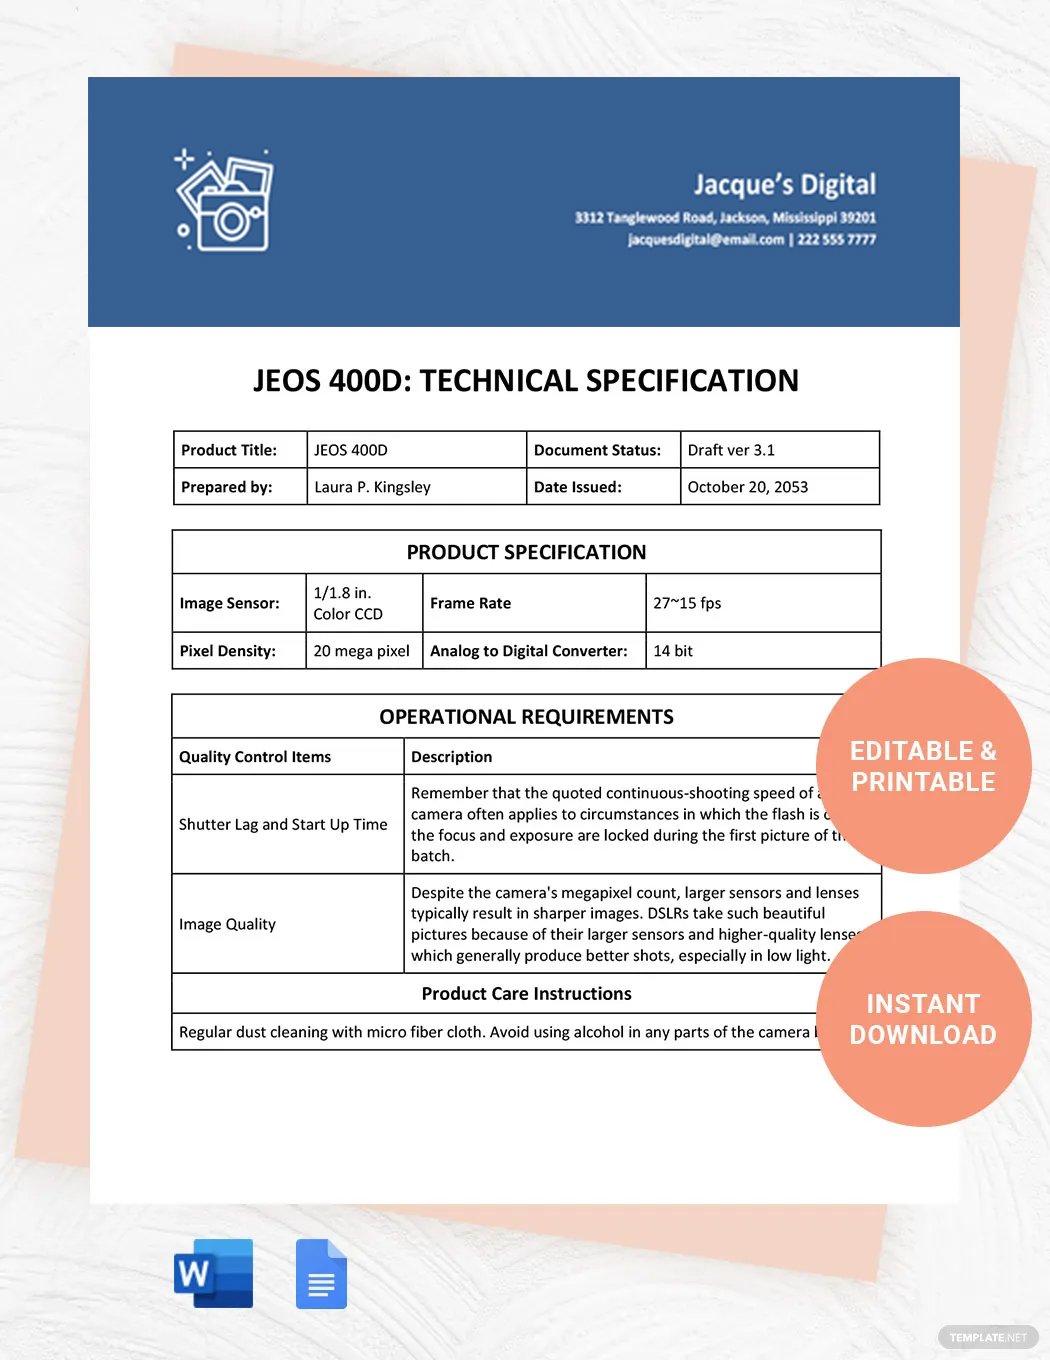 Free Technical Specification Document Template in Word, Google Docs